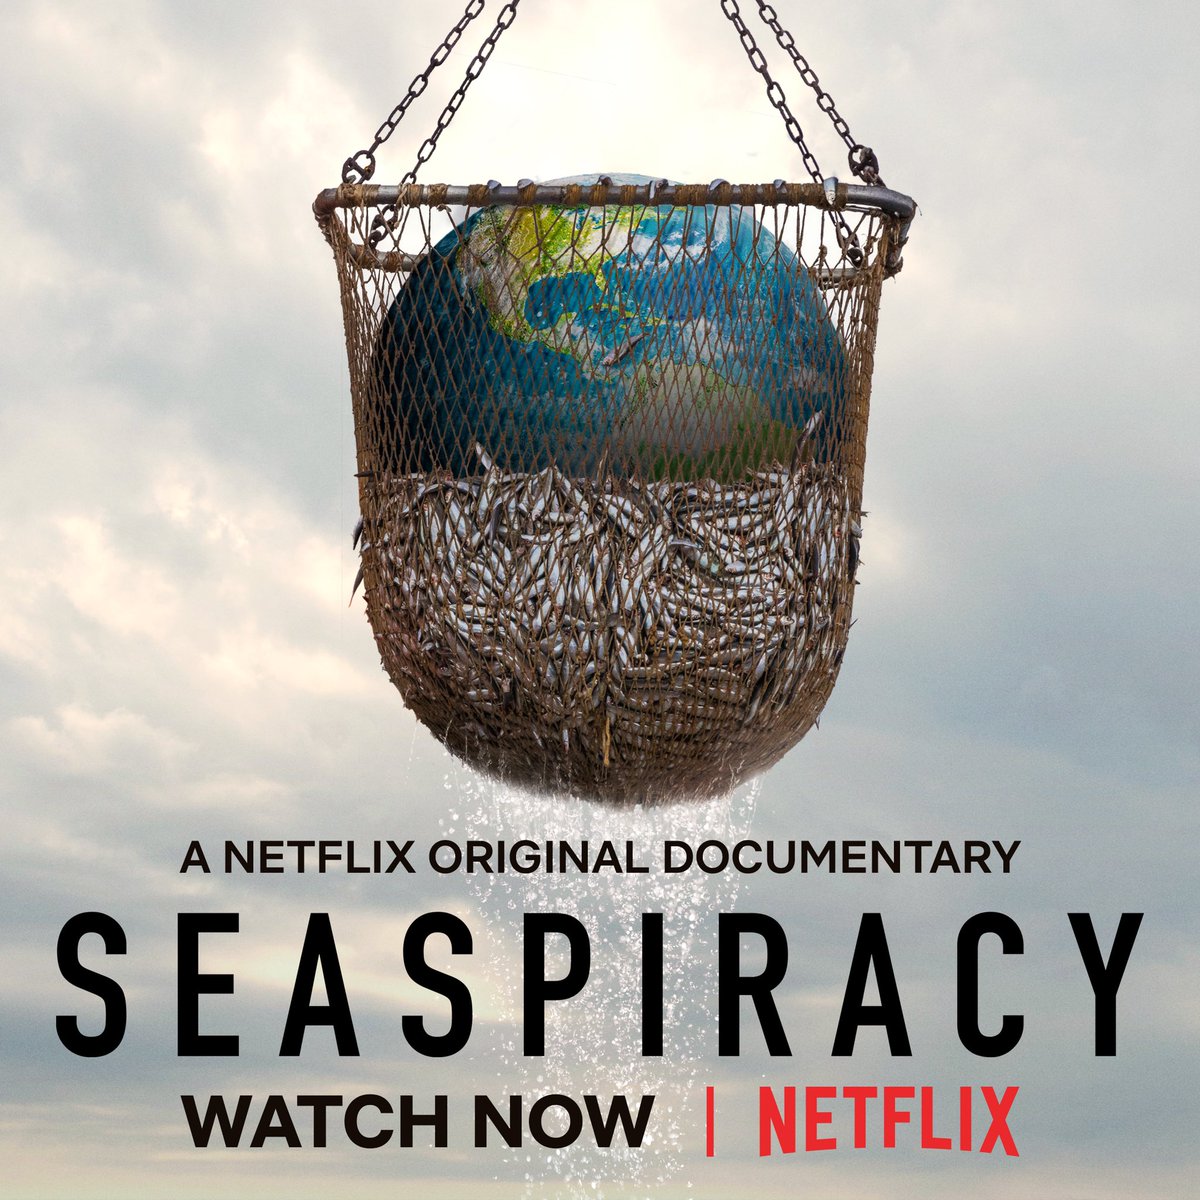 10 Things the World Needs to Learn From Seaspiracy